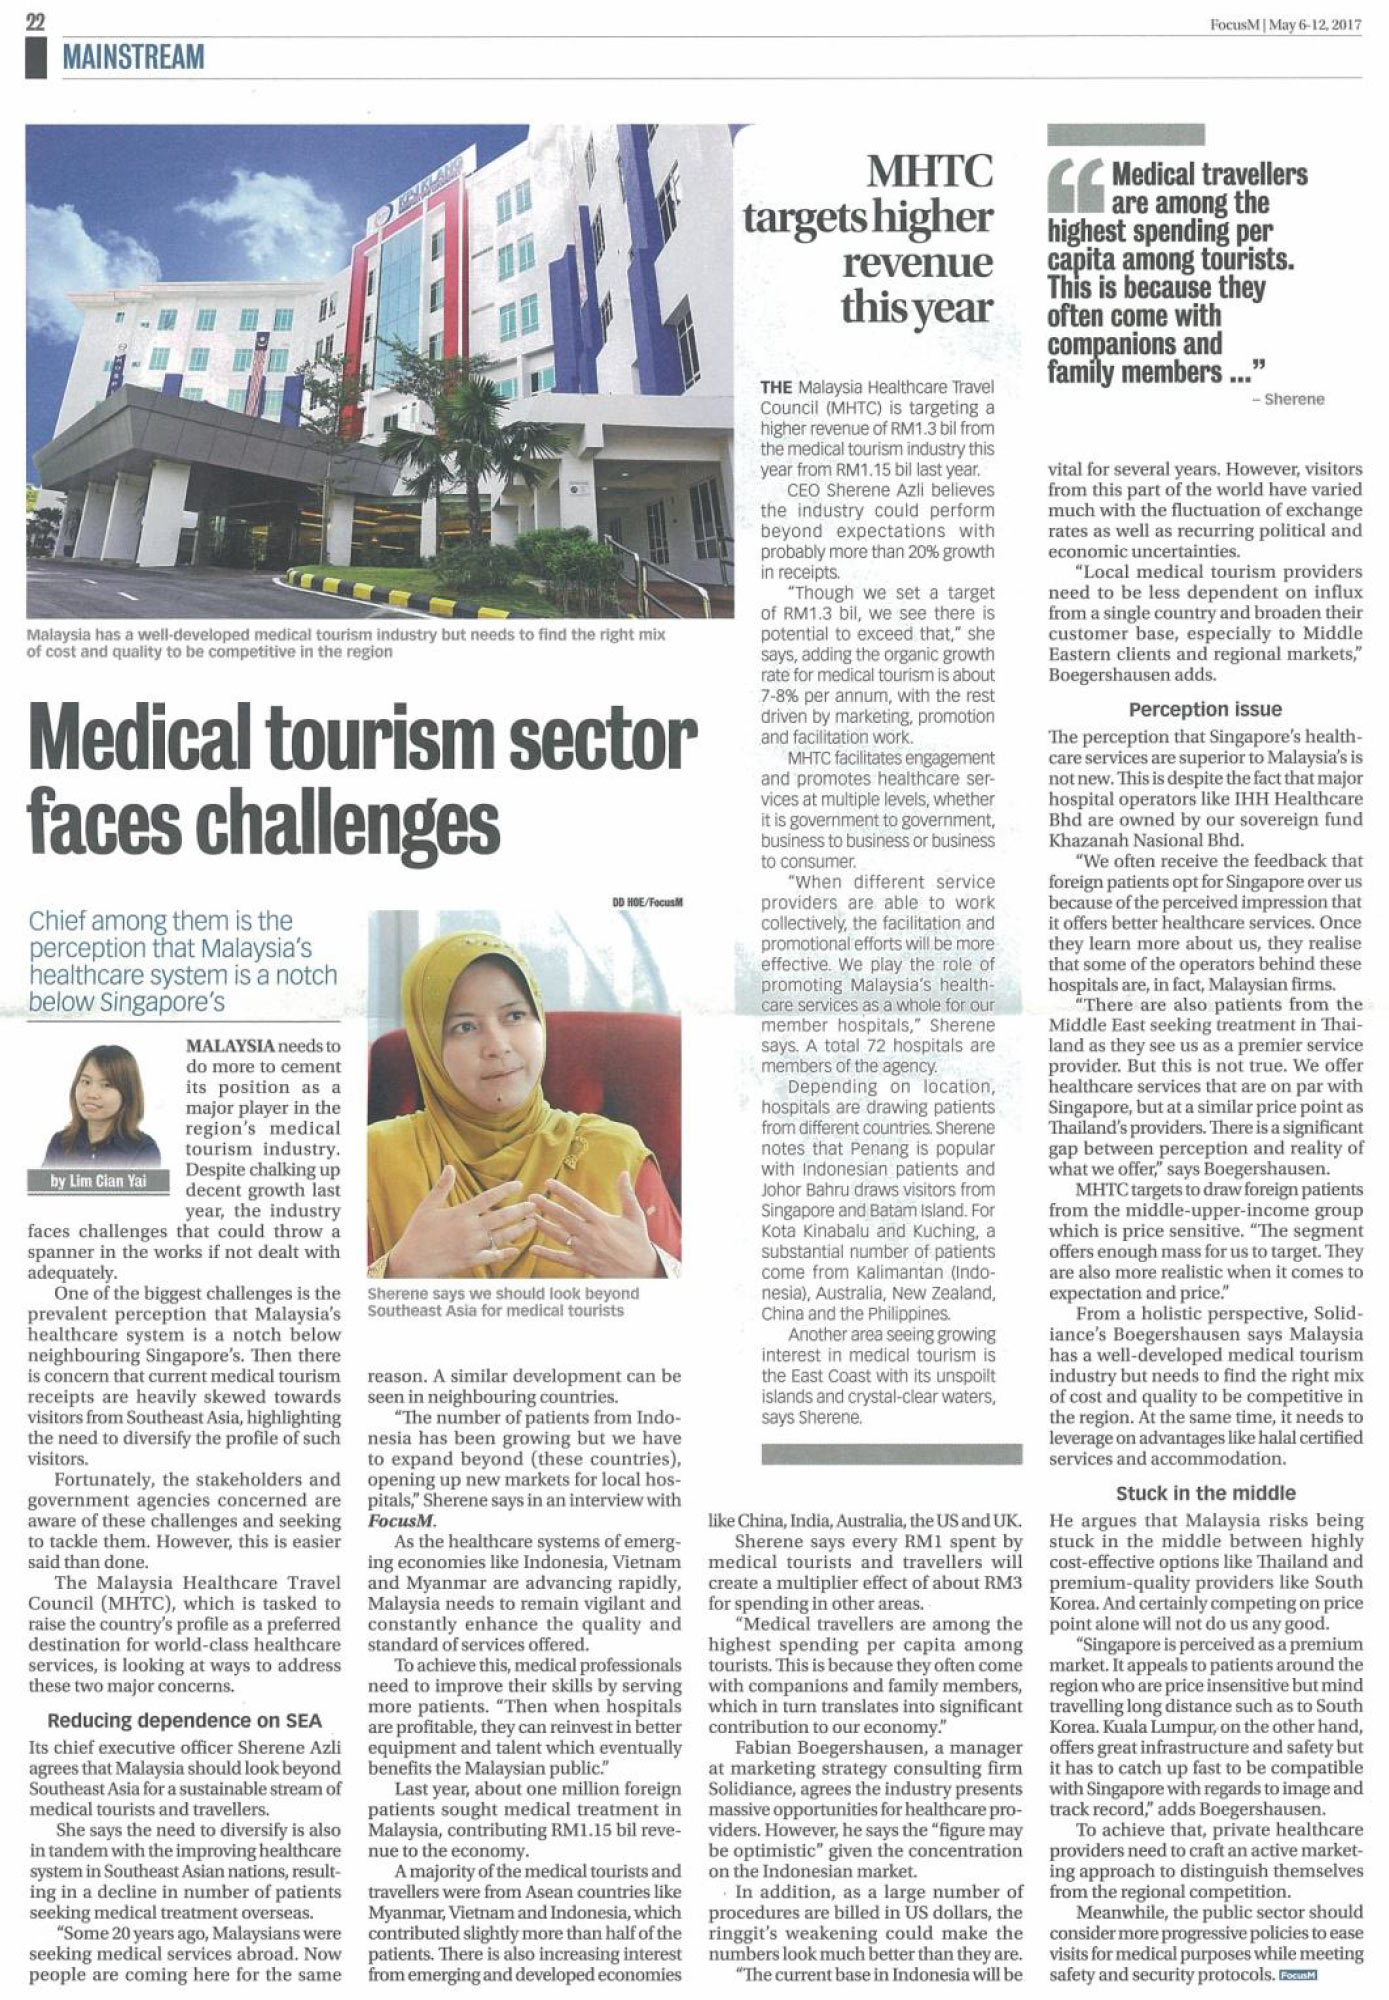 Medical Tourism Sector Faces Challenges